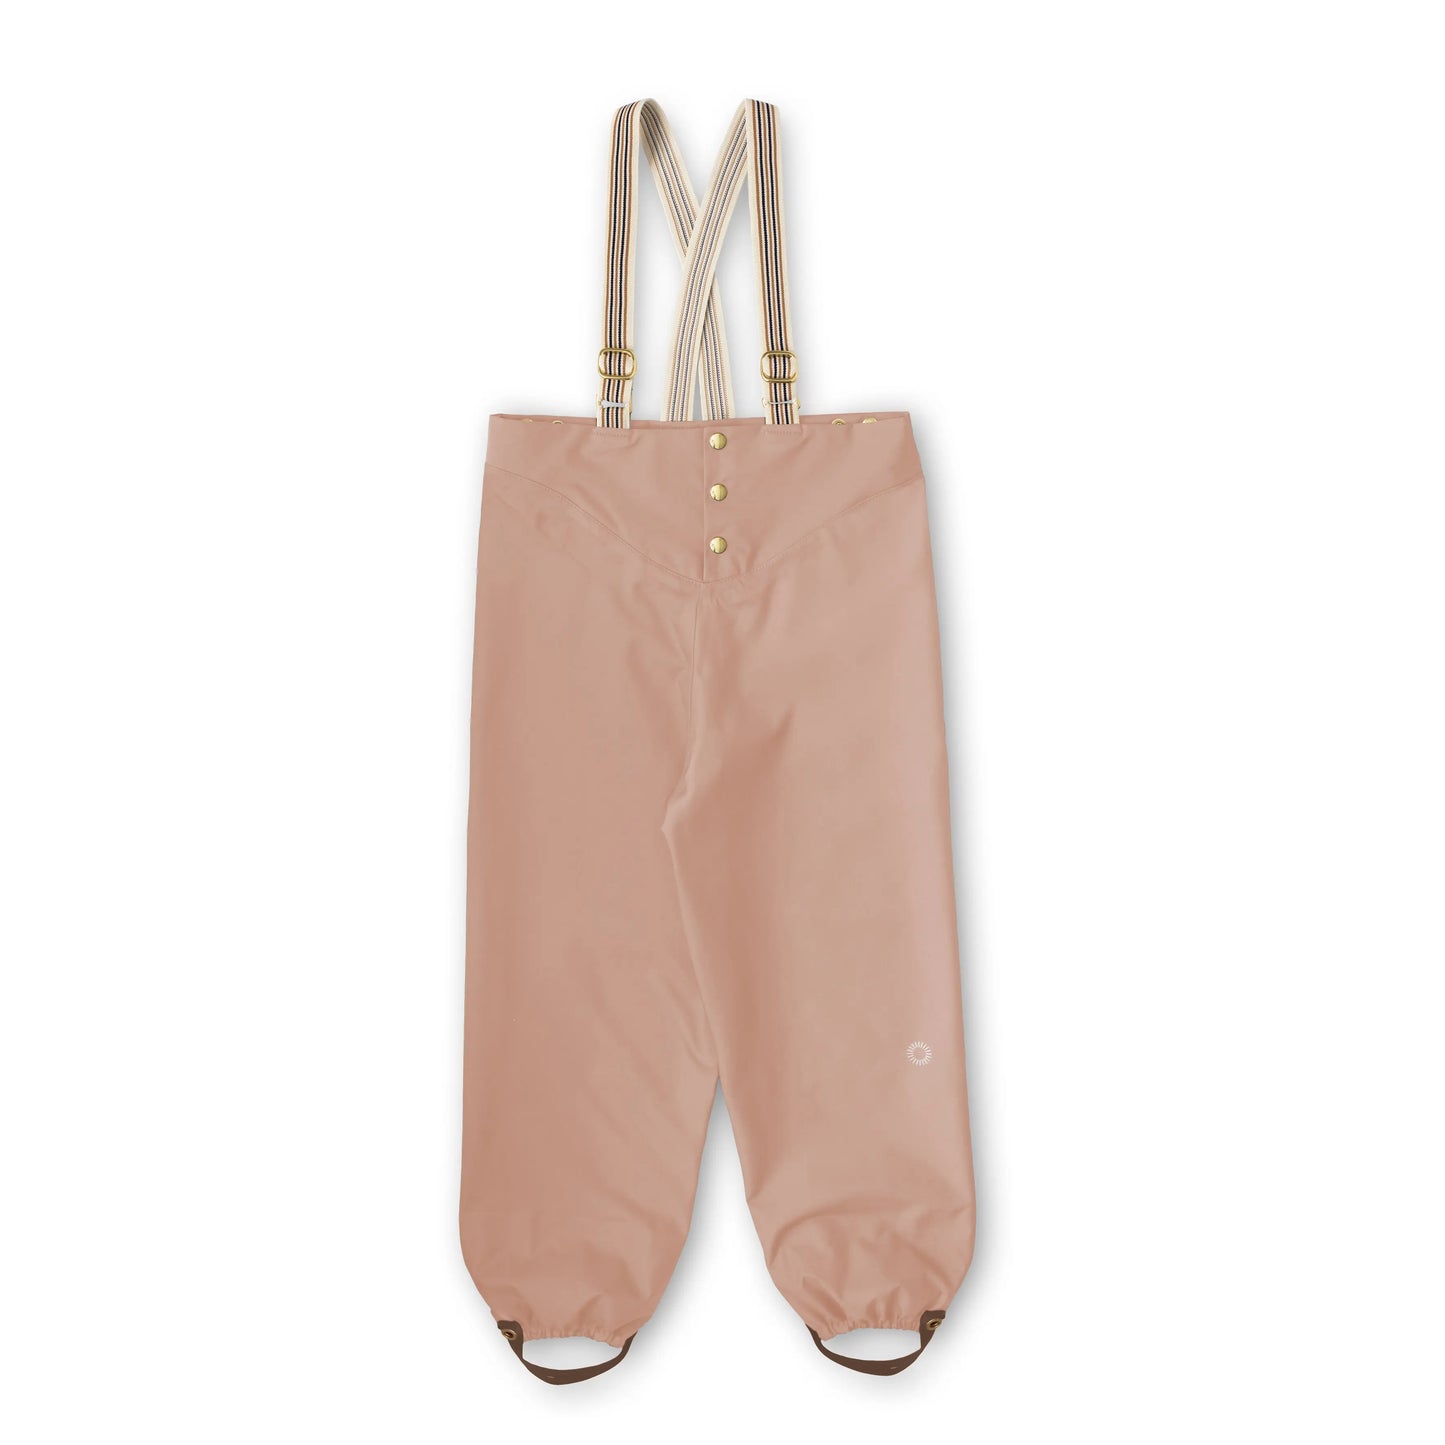 Made for children with a penchant for puddle jumping, the Rain Pants are inspired by French under trousers. The brass snaps open at the waistline to support independent dressing and there are several adjustable features: the suspenders, waistband and stirrups. This waterproof design fits at least three sizes and accommodates warm under-layers, so your child has the freedom to explore while staying cozy and dry.